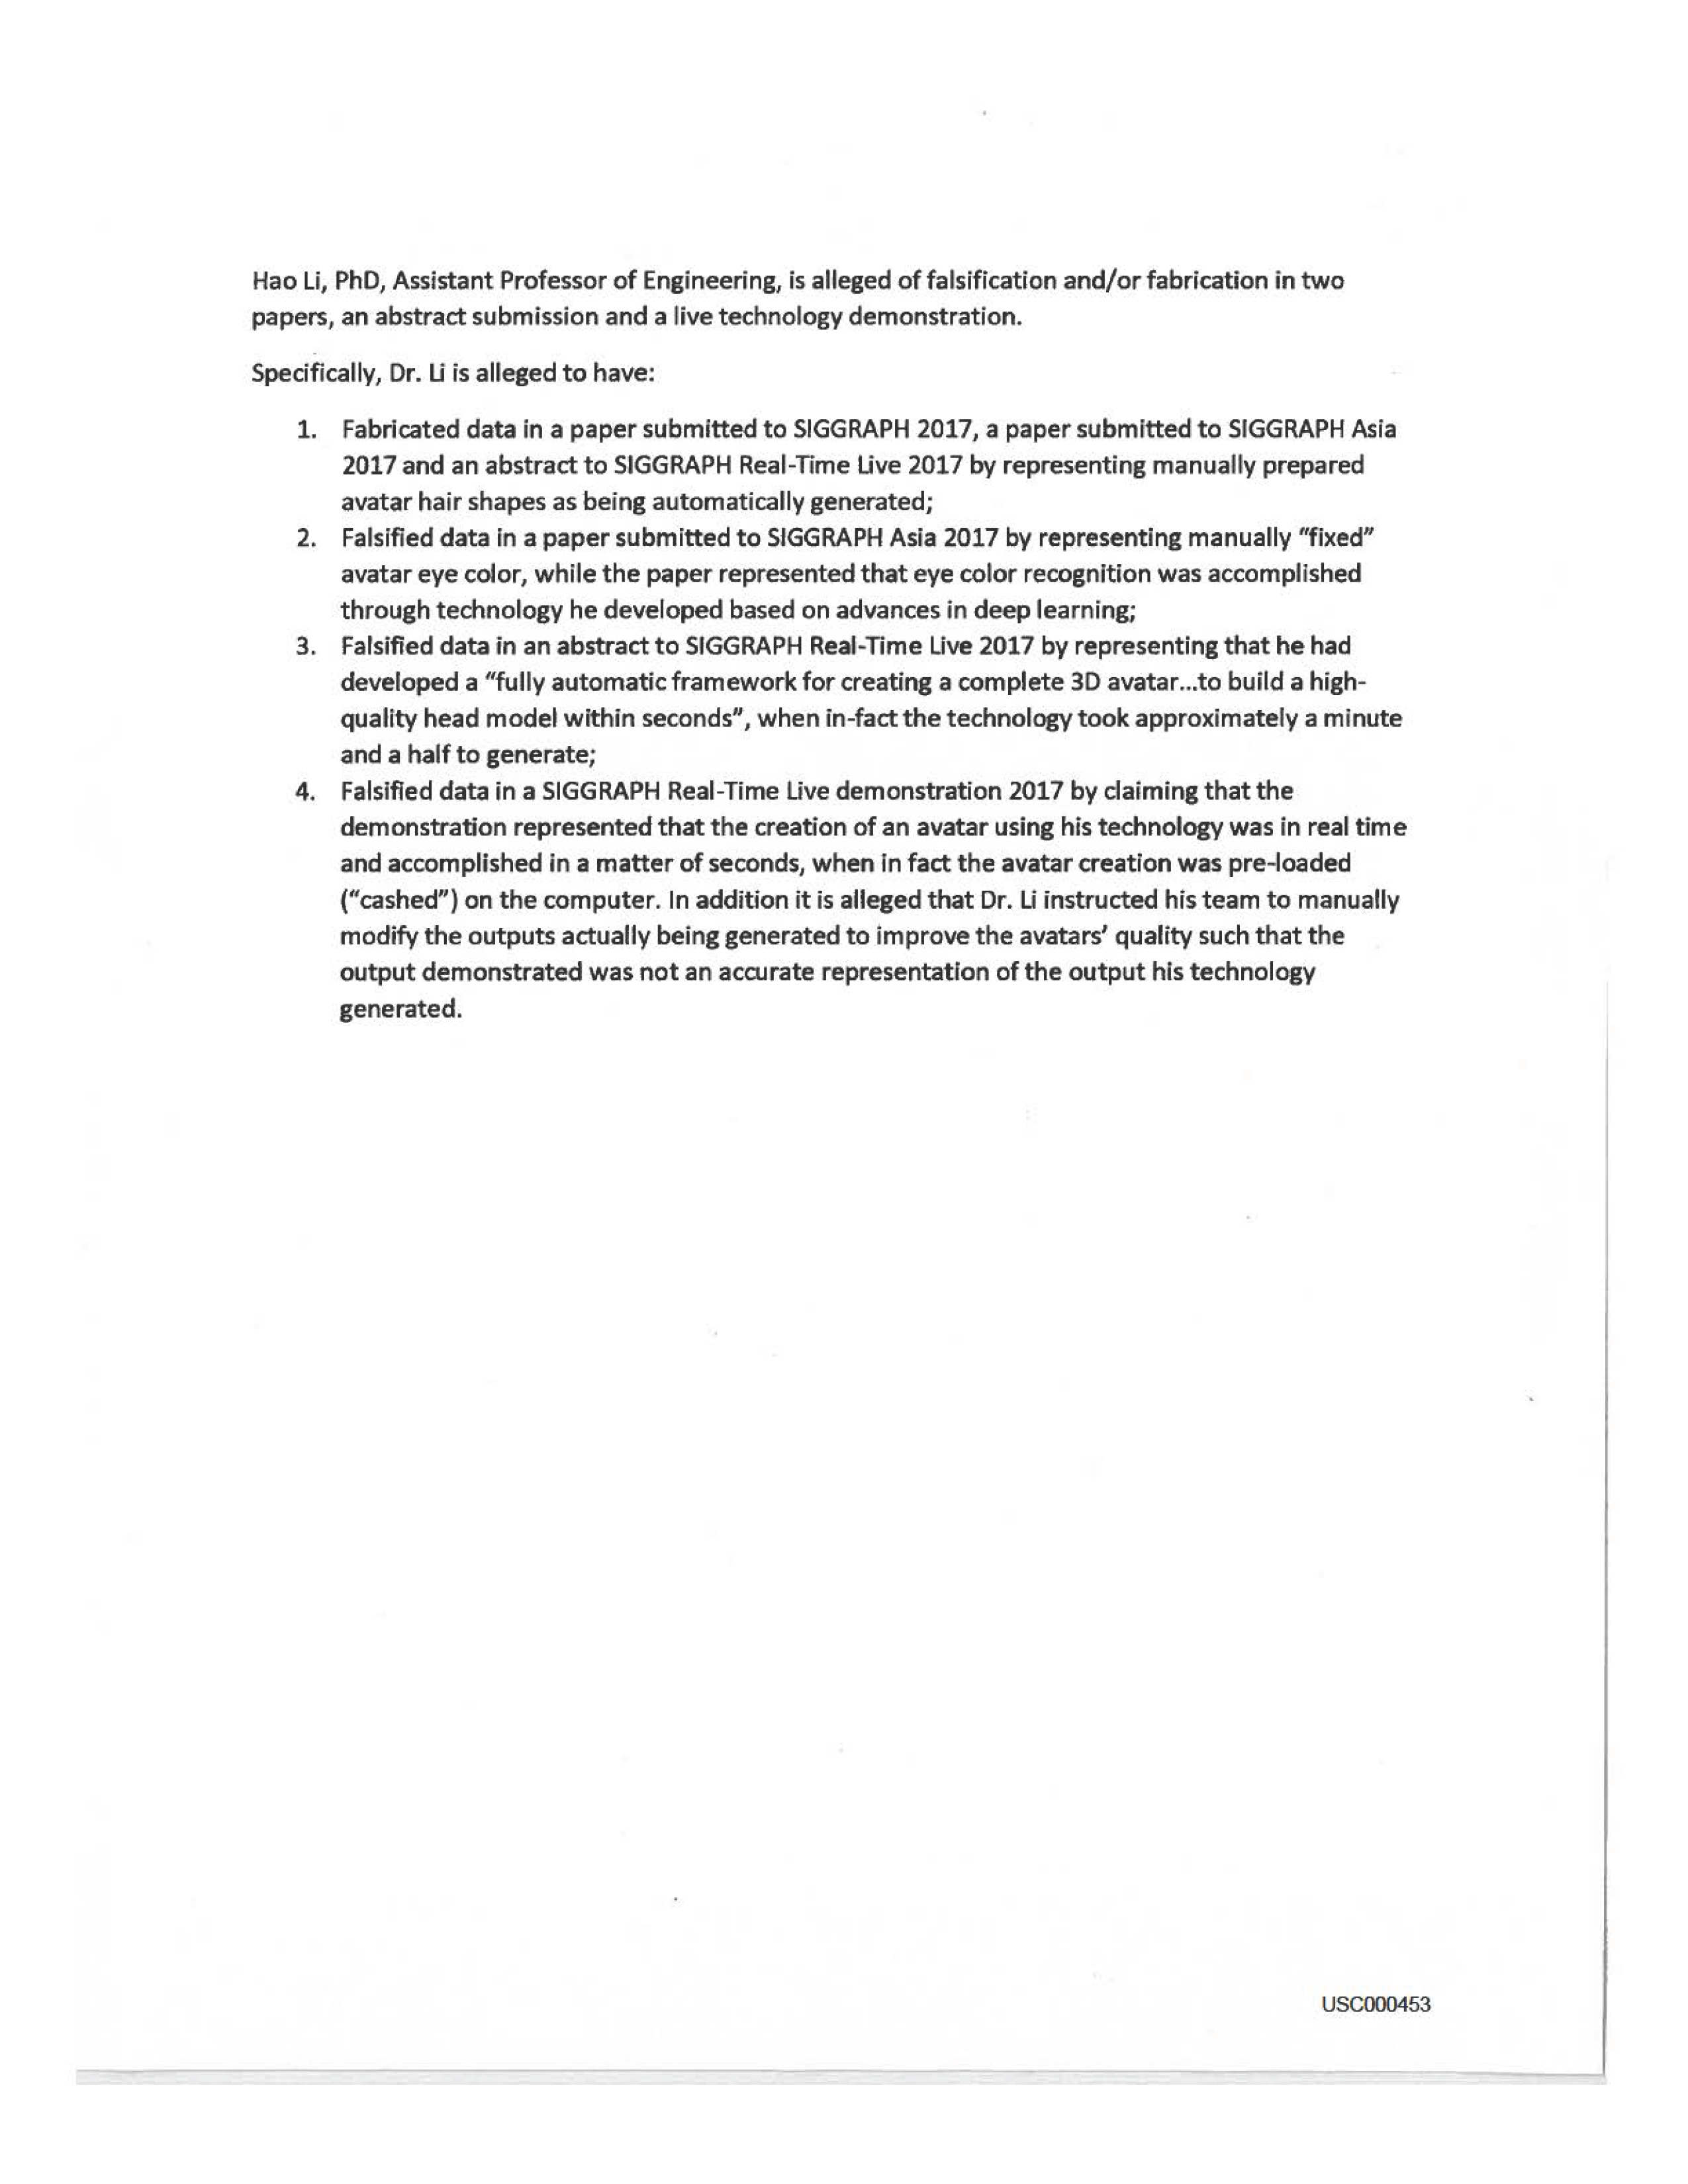 USC's Investigation Report re Hao Li's and Pinscreen's Scientific Misconduct at ACM SIGGRAPH RTL 2017 [Summary] Page 88